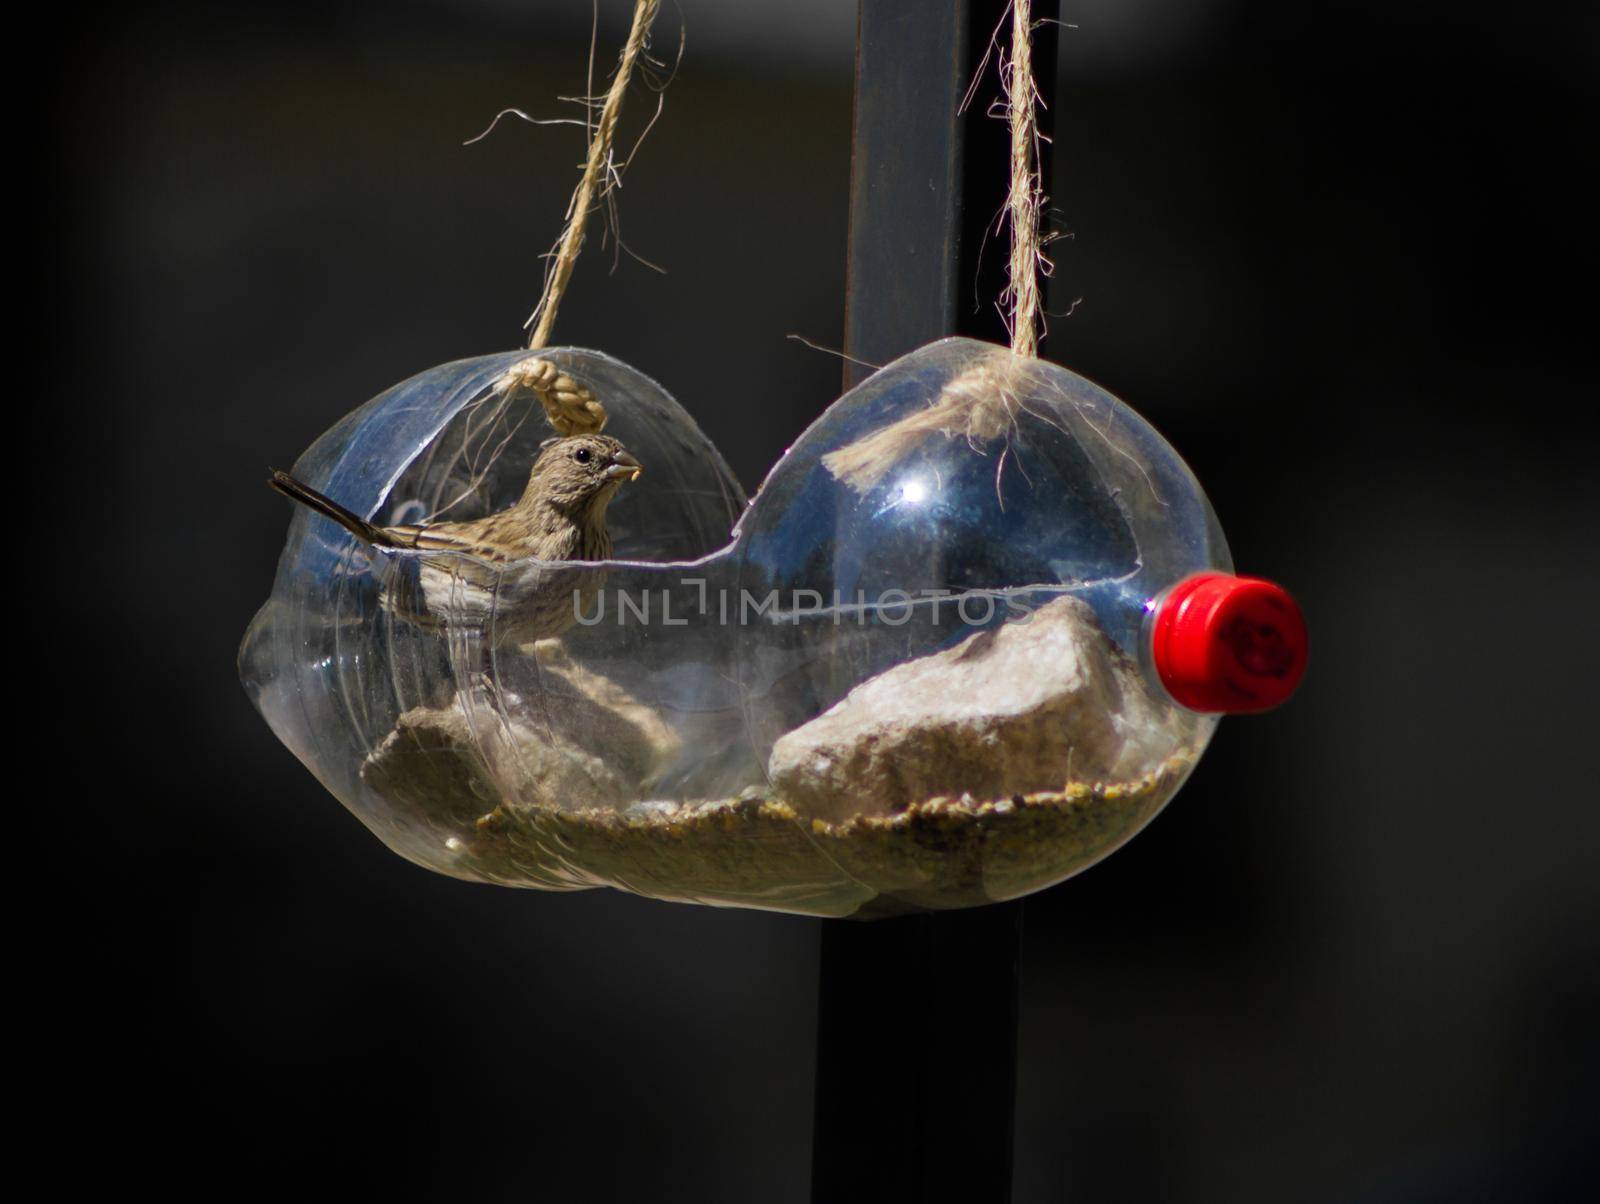 a bird eating at the bird feeder made from a recycled soda bottle